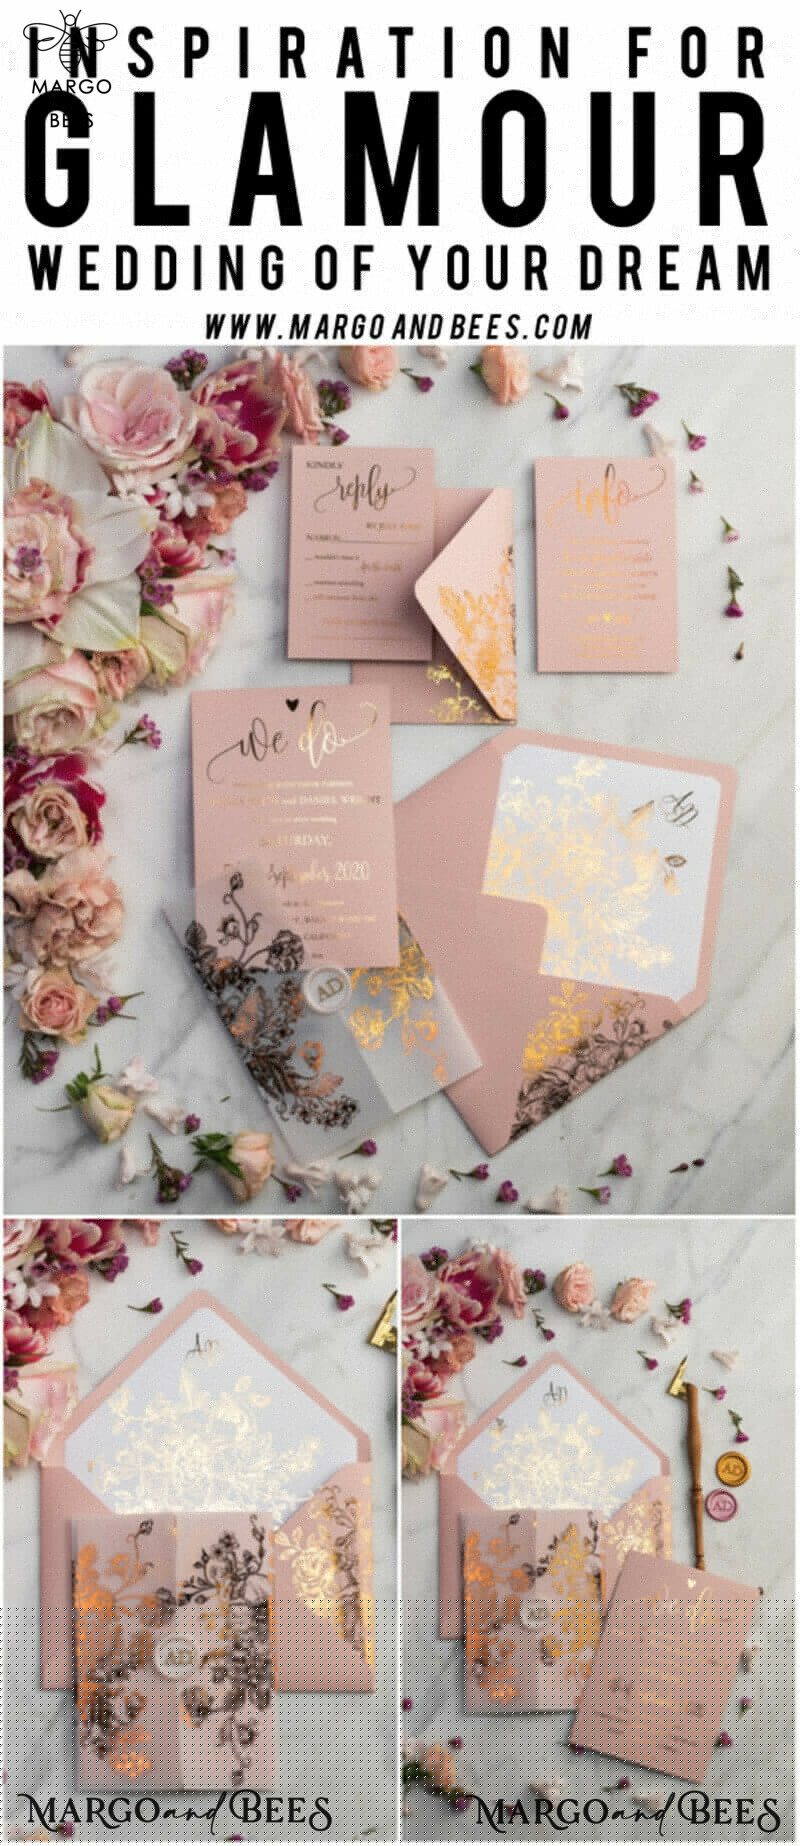 Luxury Vellum Gold Foil Wedding Invitations: An Elegant Blush Pink Invitation Suite with Glamour and Golden Shine-57